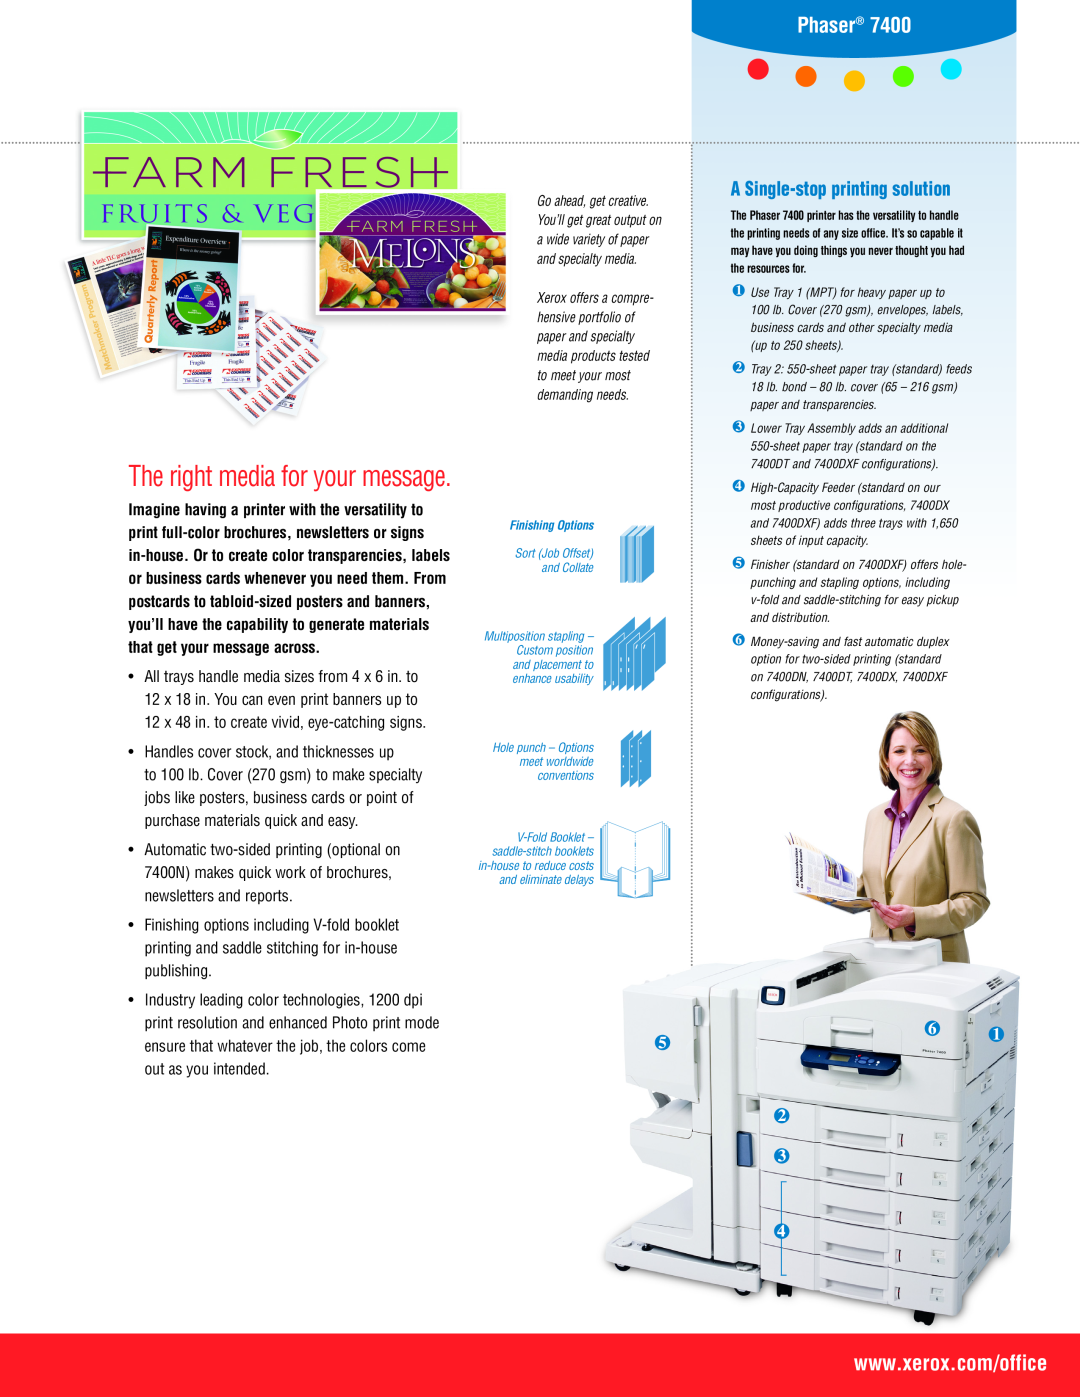 Xerox 7400 manual The right media for your message, 12 x 48 in. to create vivid, eye-catchingsigns, Phaser 